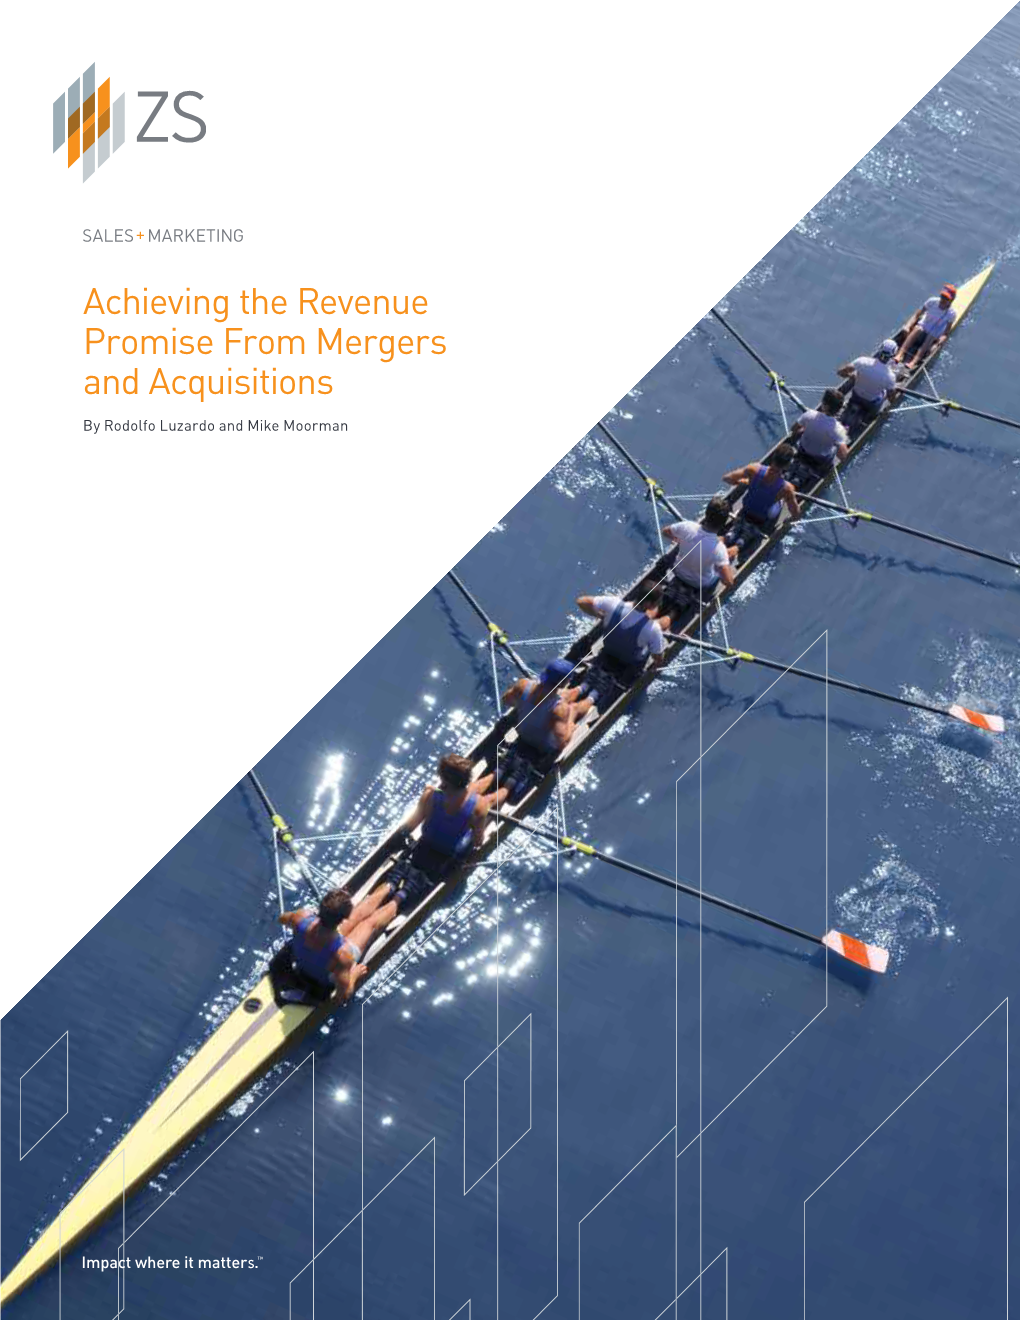 Achieving the Revenue Promise from Mergers and Acquisitions